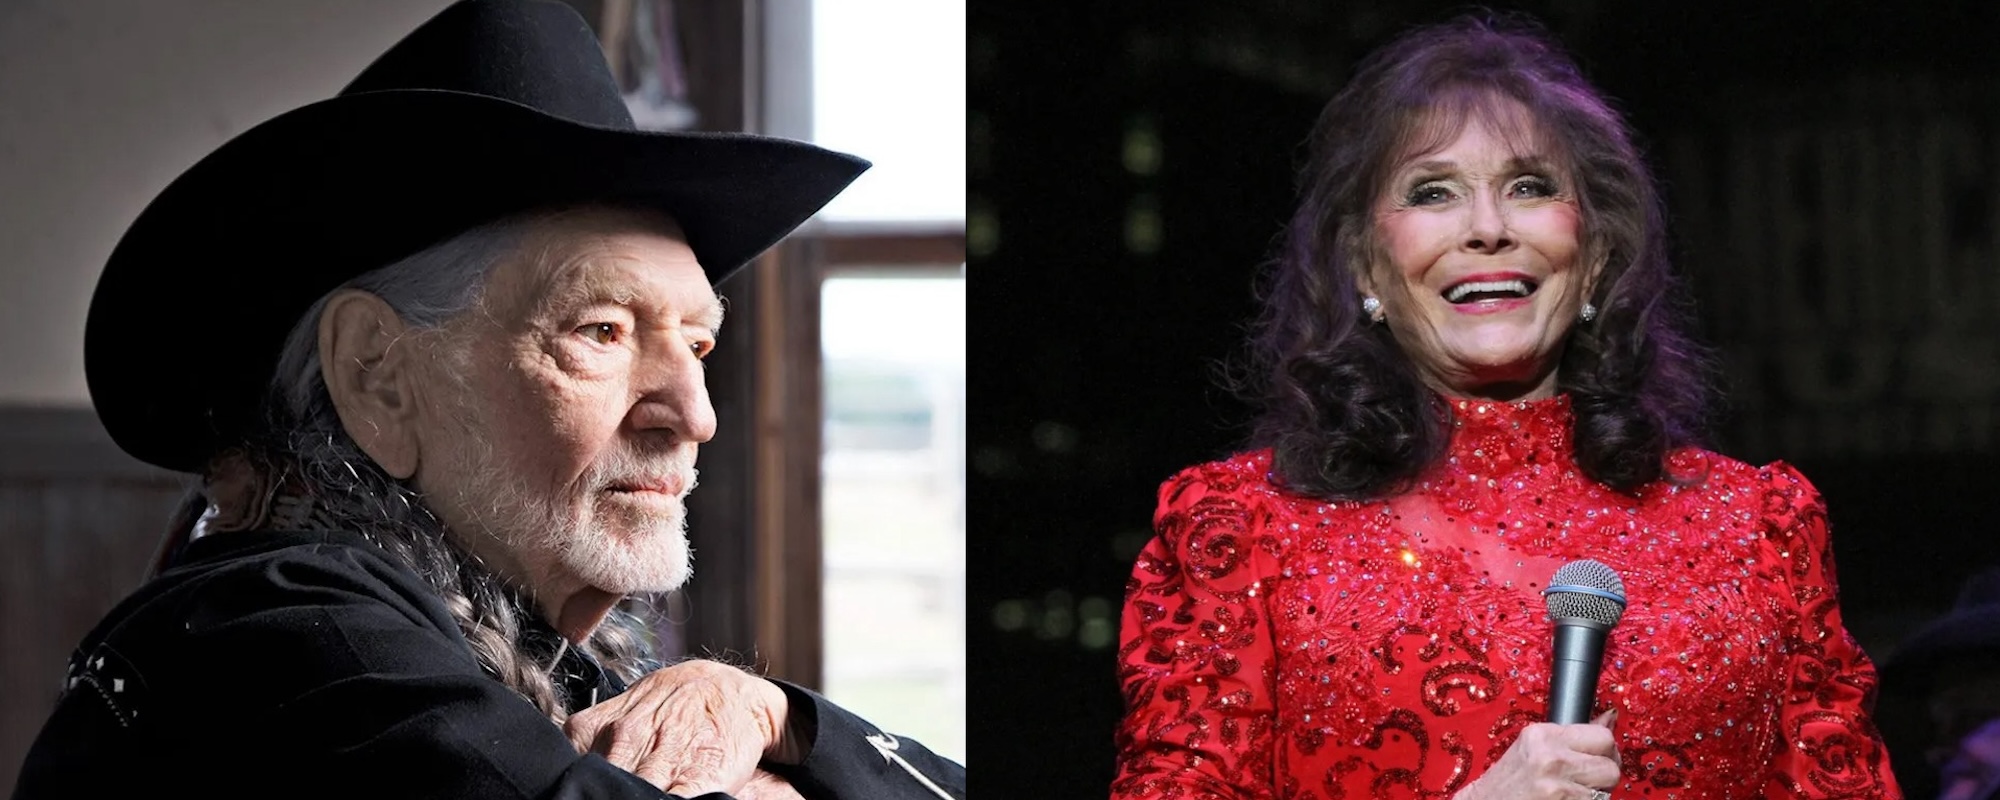 A Meditation on Mortality: The Story Behind the First and Only Duet Between Loretta Lynn and Willie Nelson, “Lay Me Down”